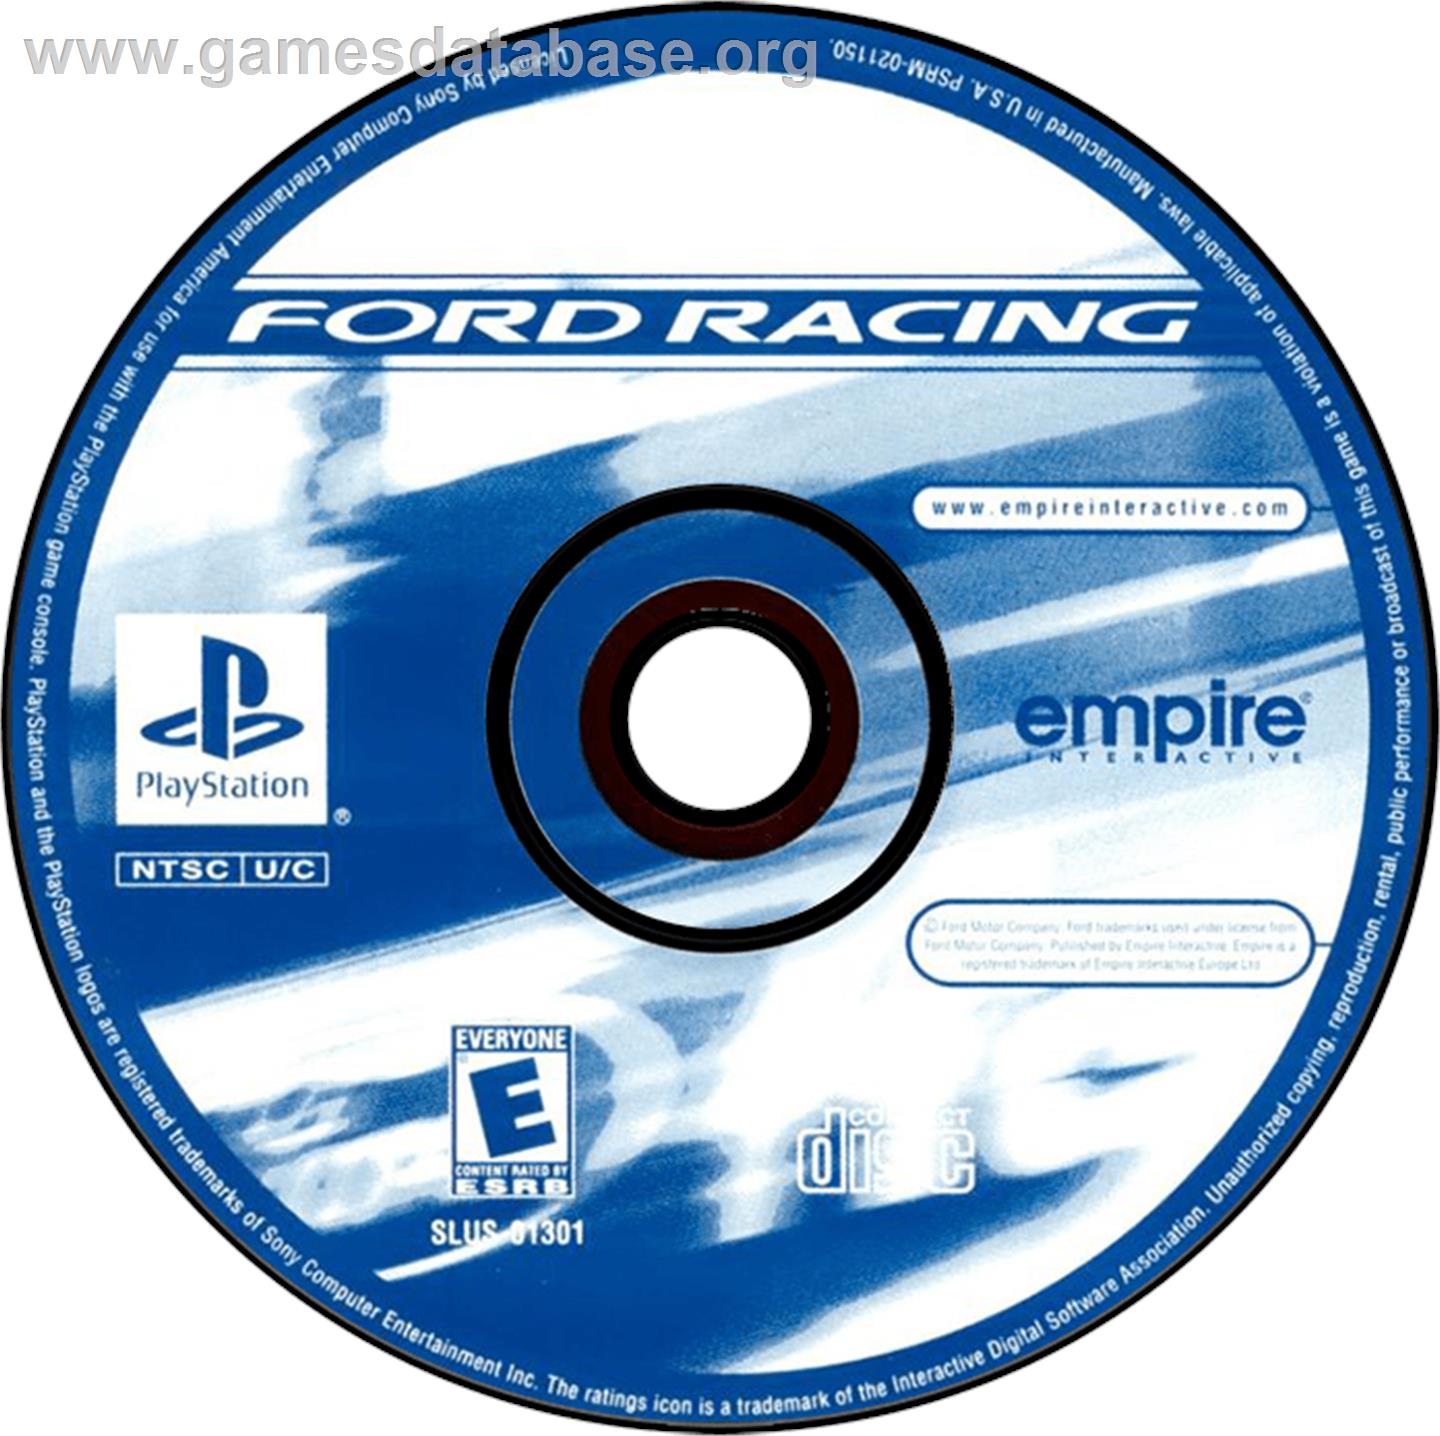 Ford Racing - Sony Playstation - Artwork - Disc